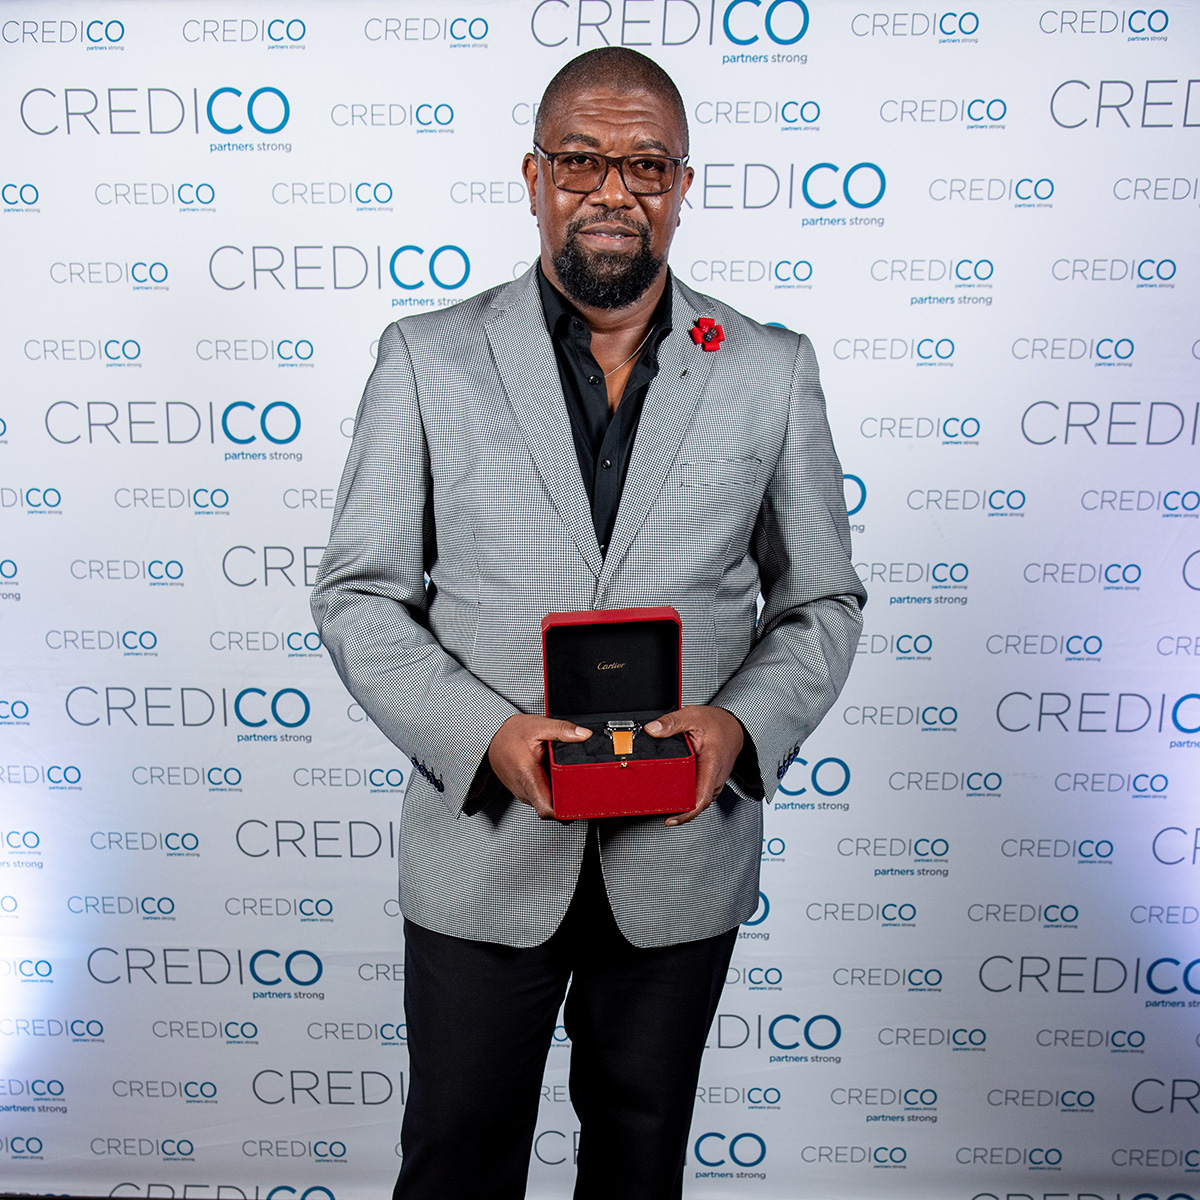 Patrick Maloba poses with his well-earned reward of a designer watch in front of a Credico-branded backdrop at Credico South Africa's 2023 Awards Gala at Sun City Resort.